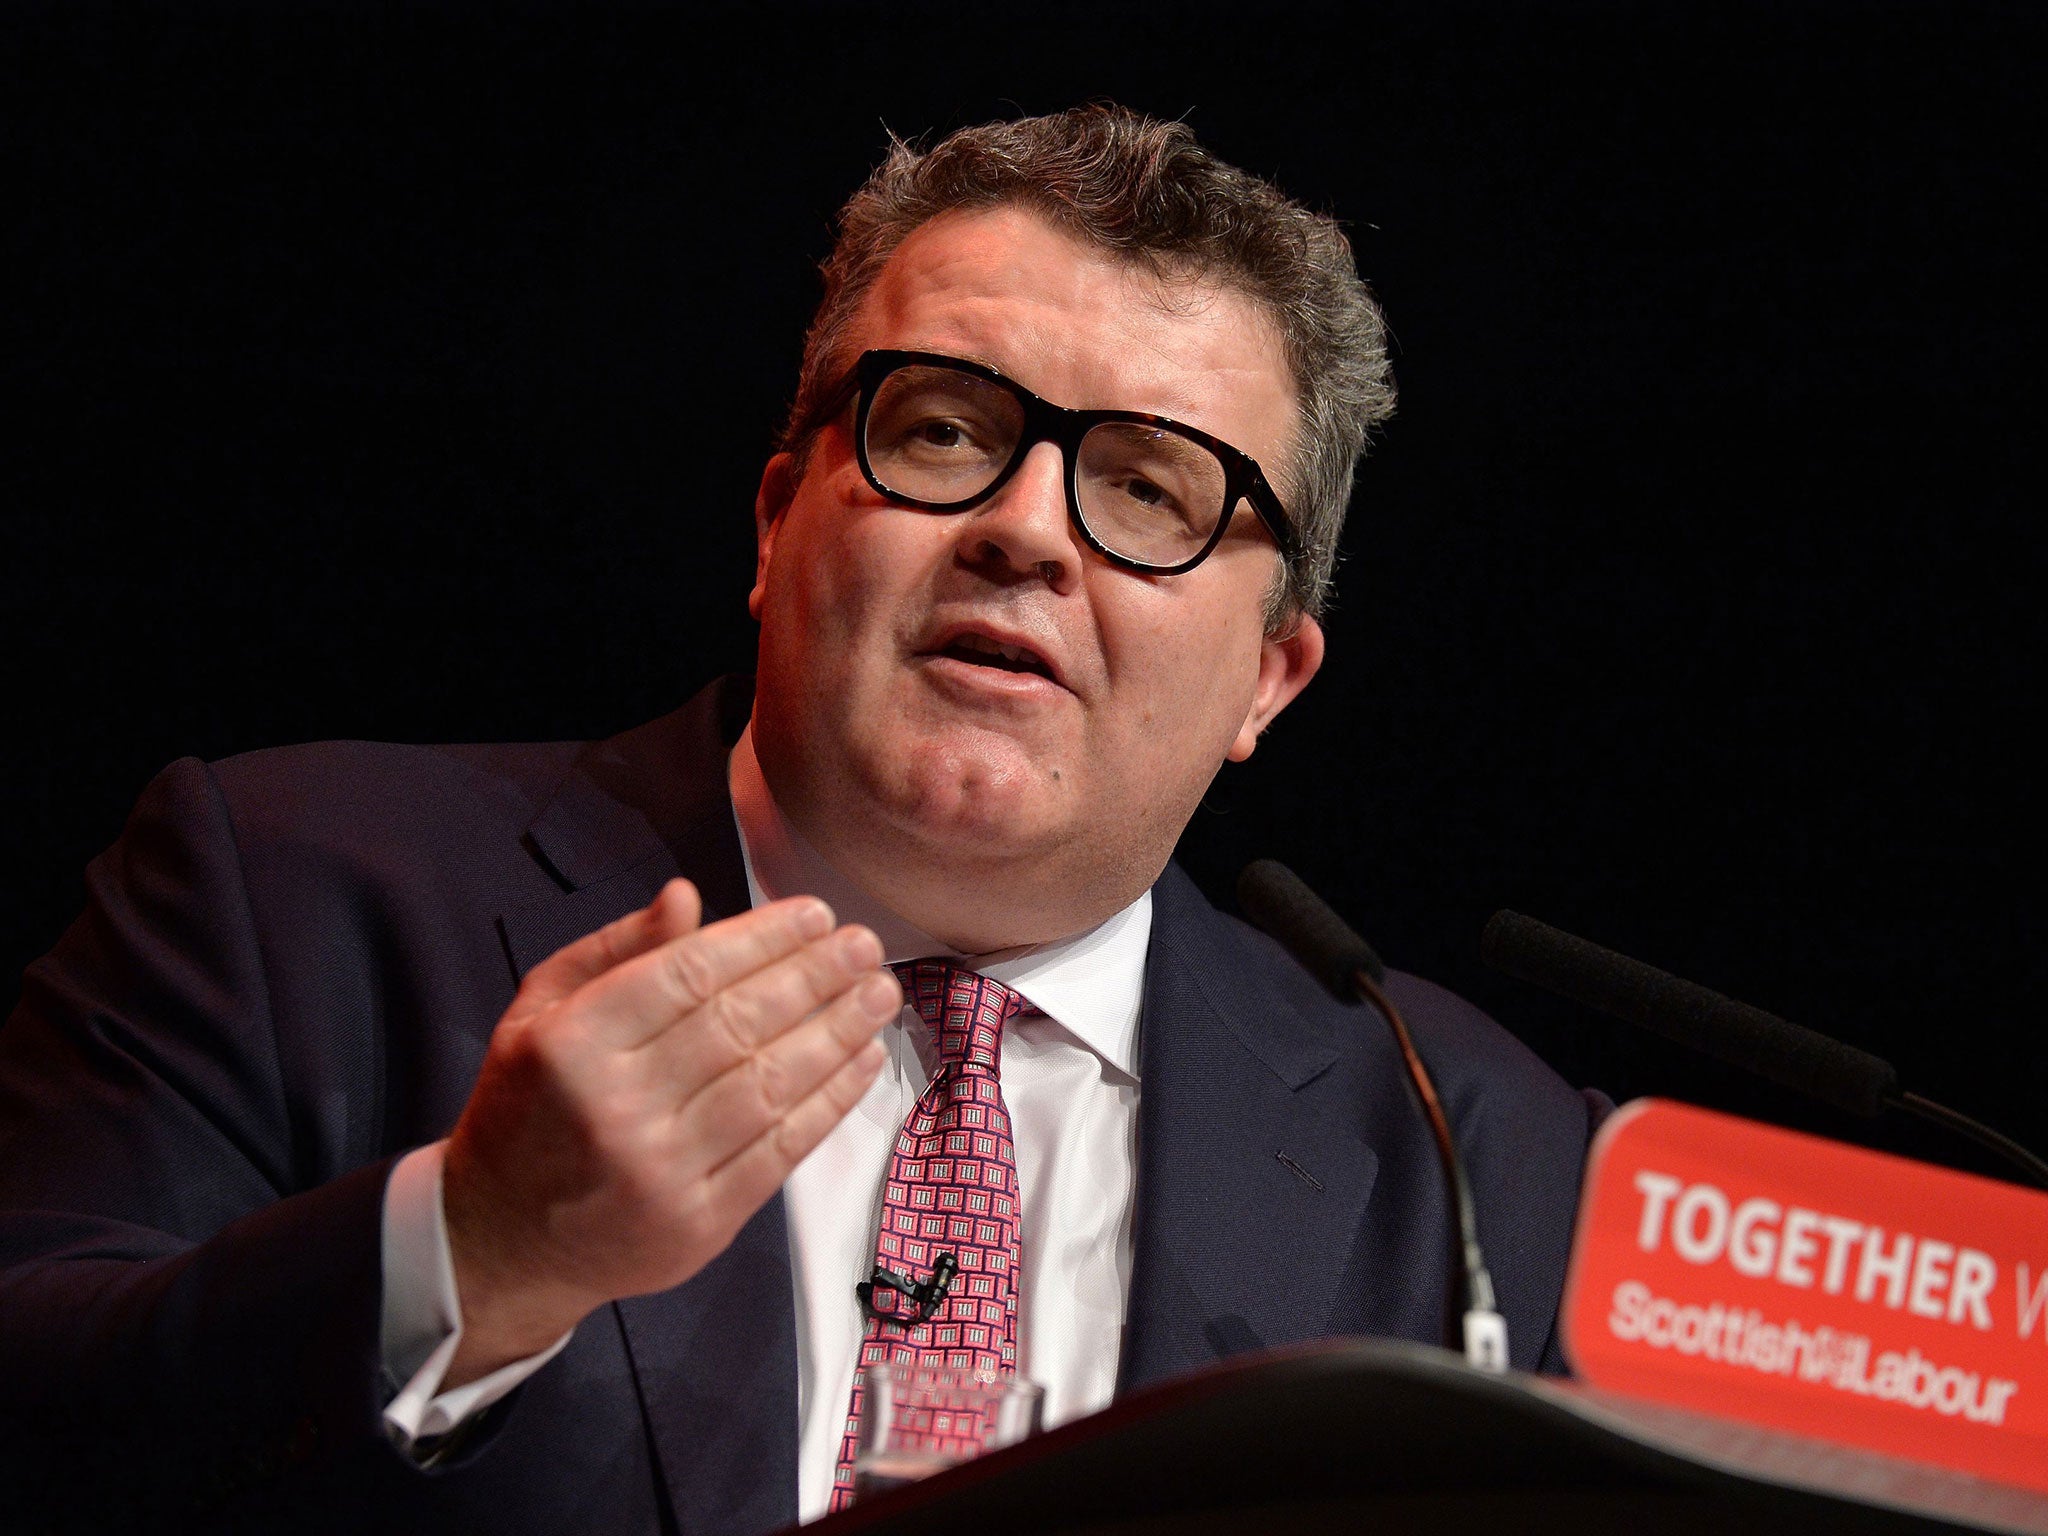 Tom Watson, deputy leader of the Labour Party, speaking at the Scottish Labour Party Conference in Perth